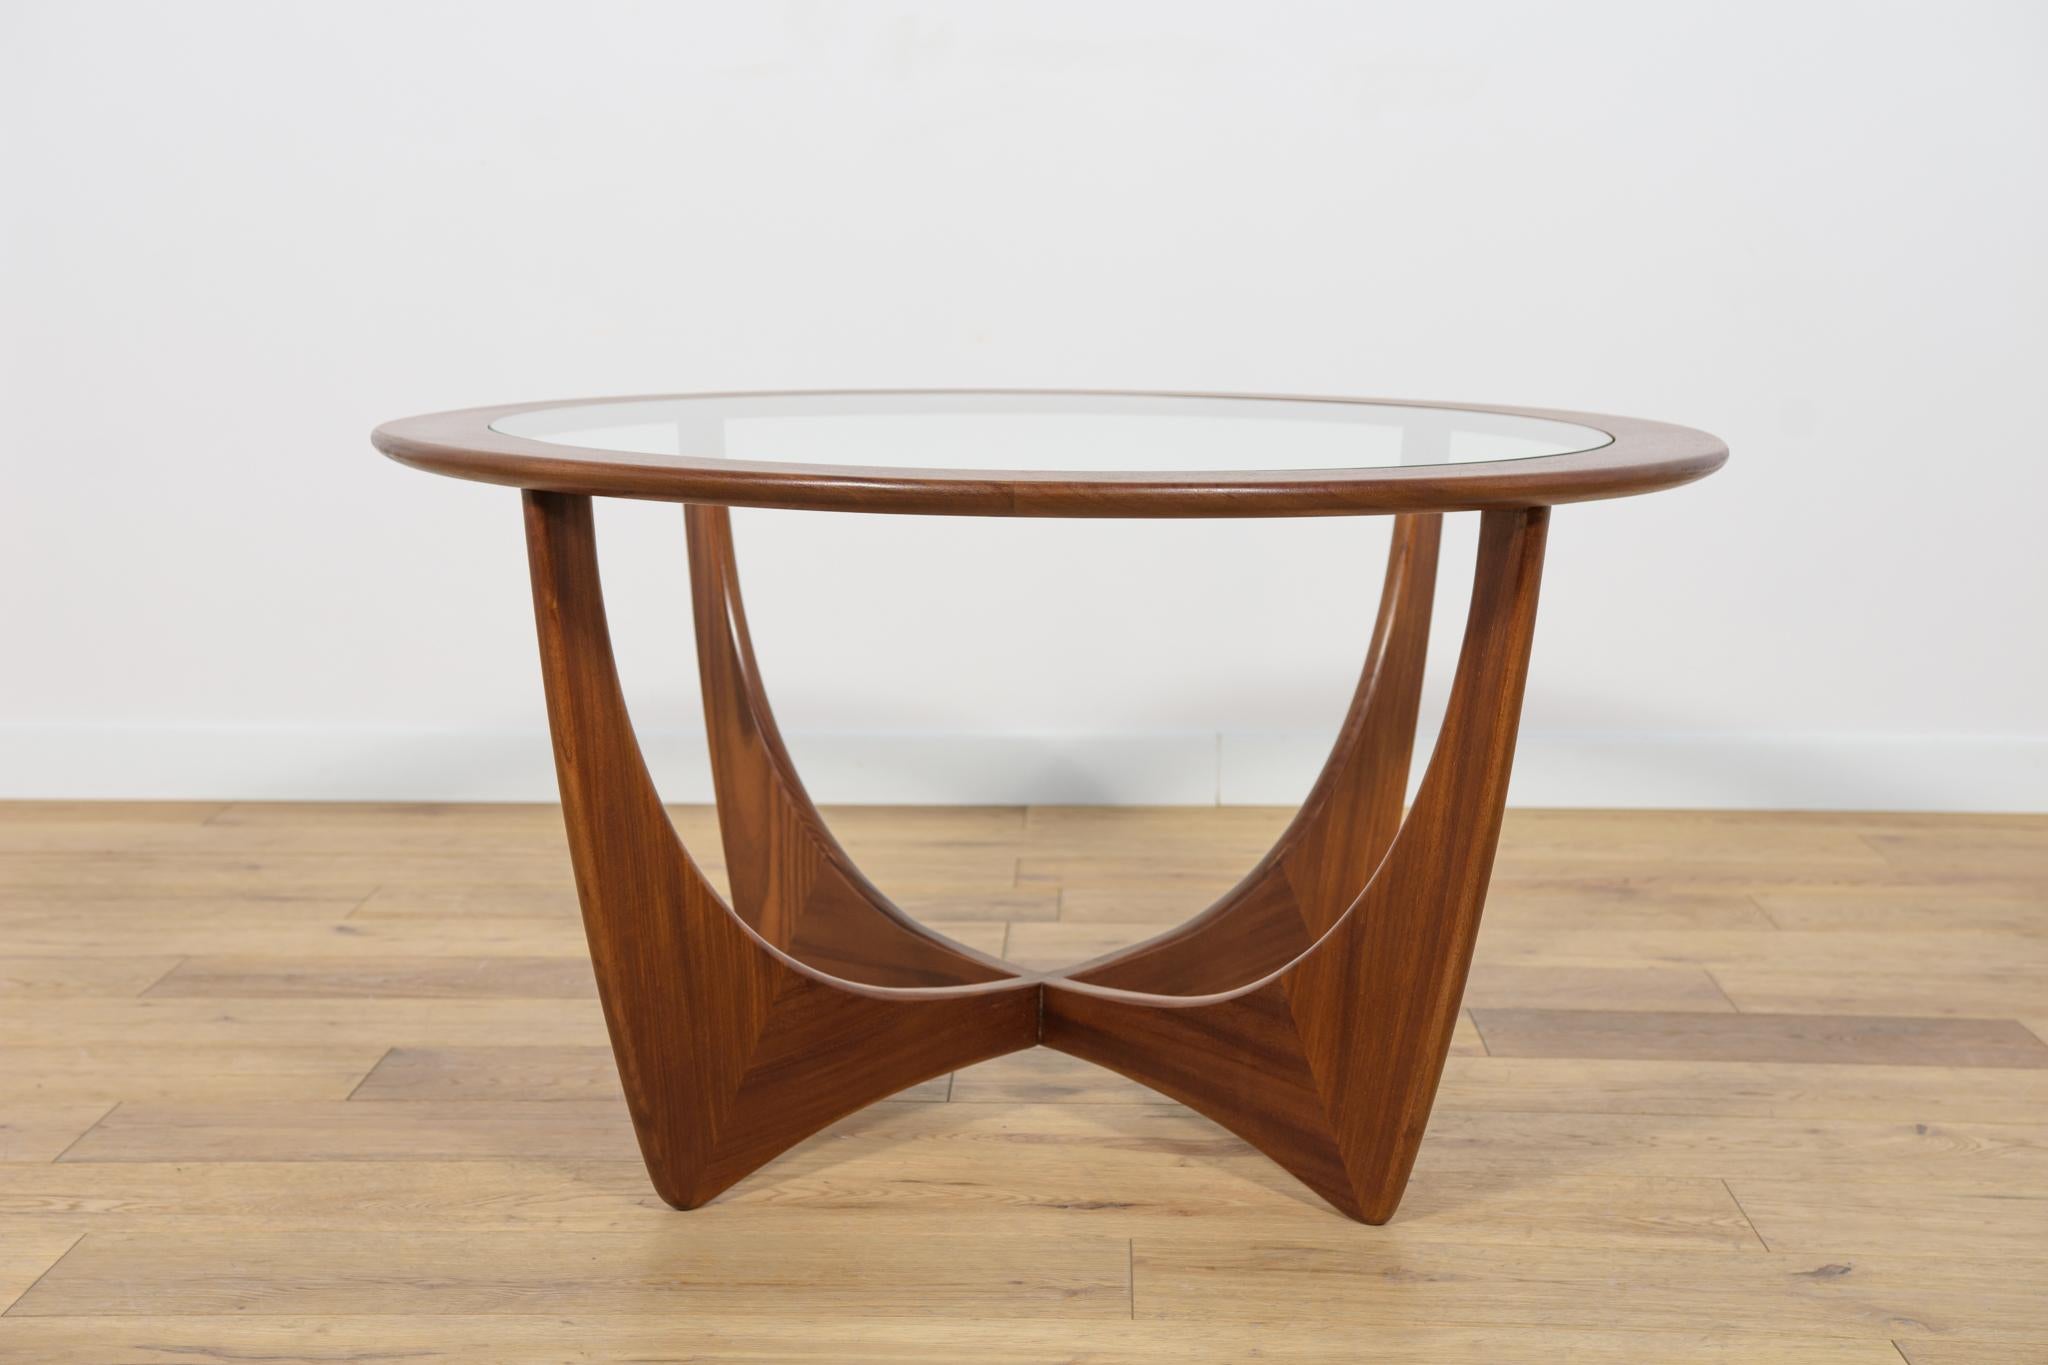 The coffee table was designed by Victor Wilkins for the British manufacturer G-Plan in the 1960s. The solid teak wood has been completely renovated and finished with Danish oil. The glass is tempered, replaced with a new one.